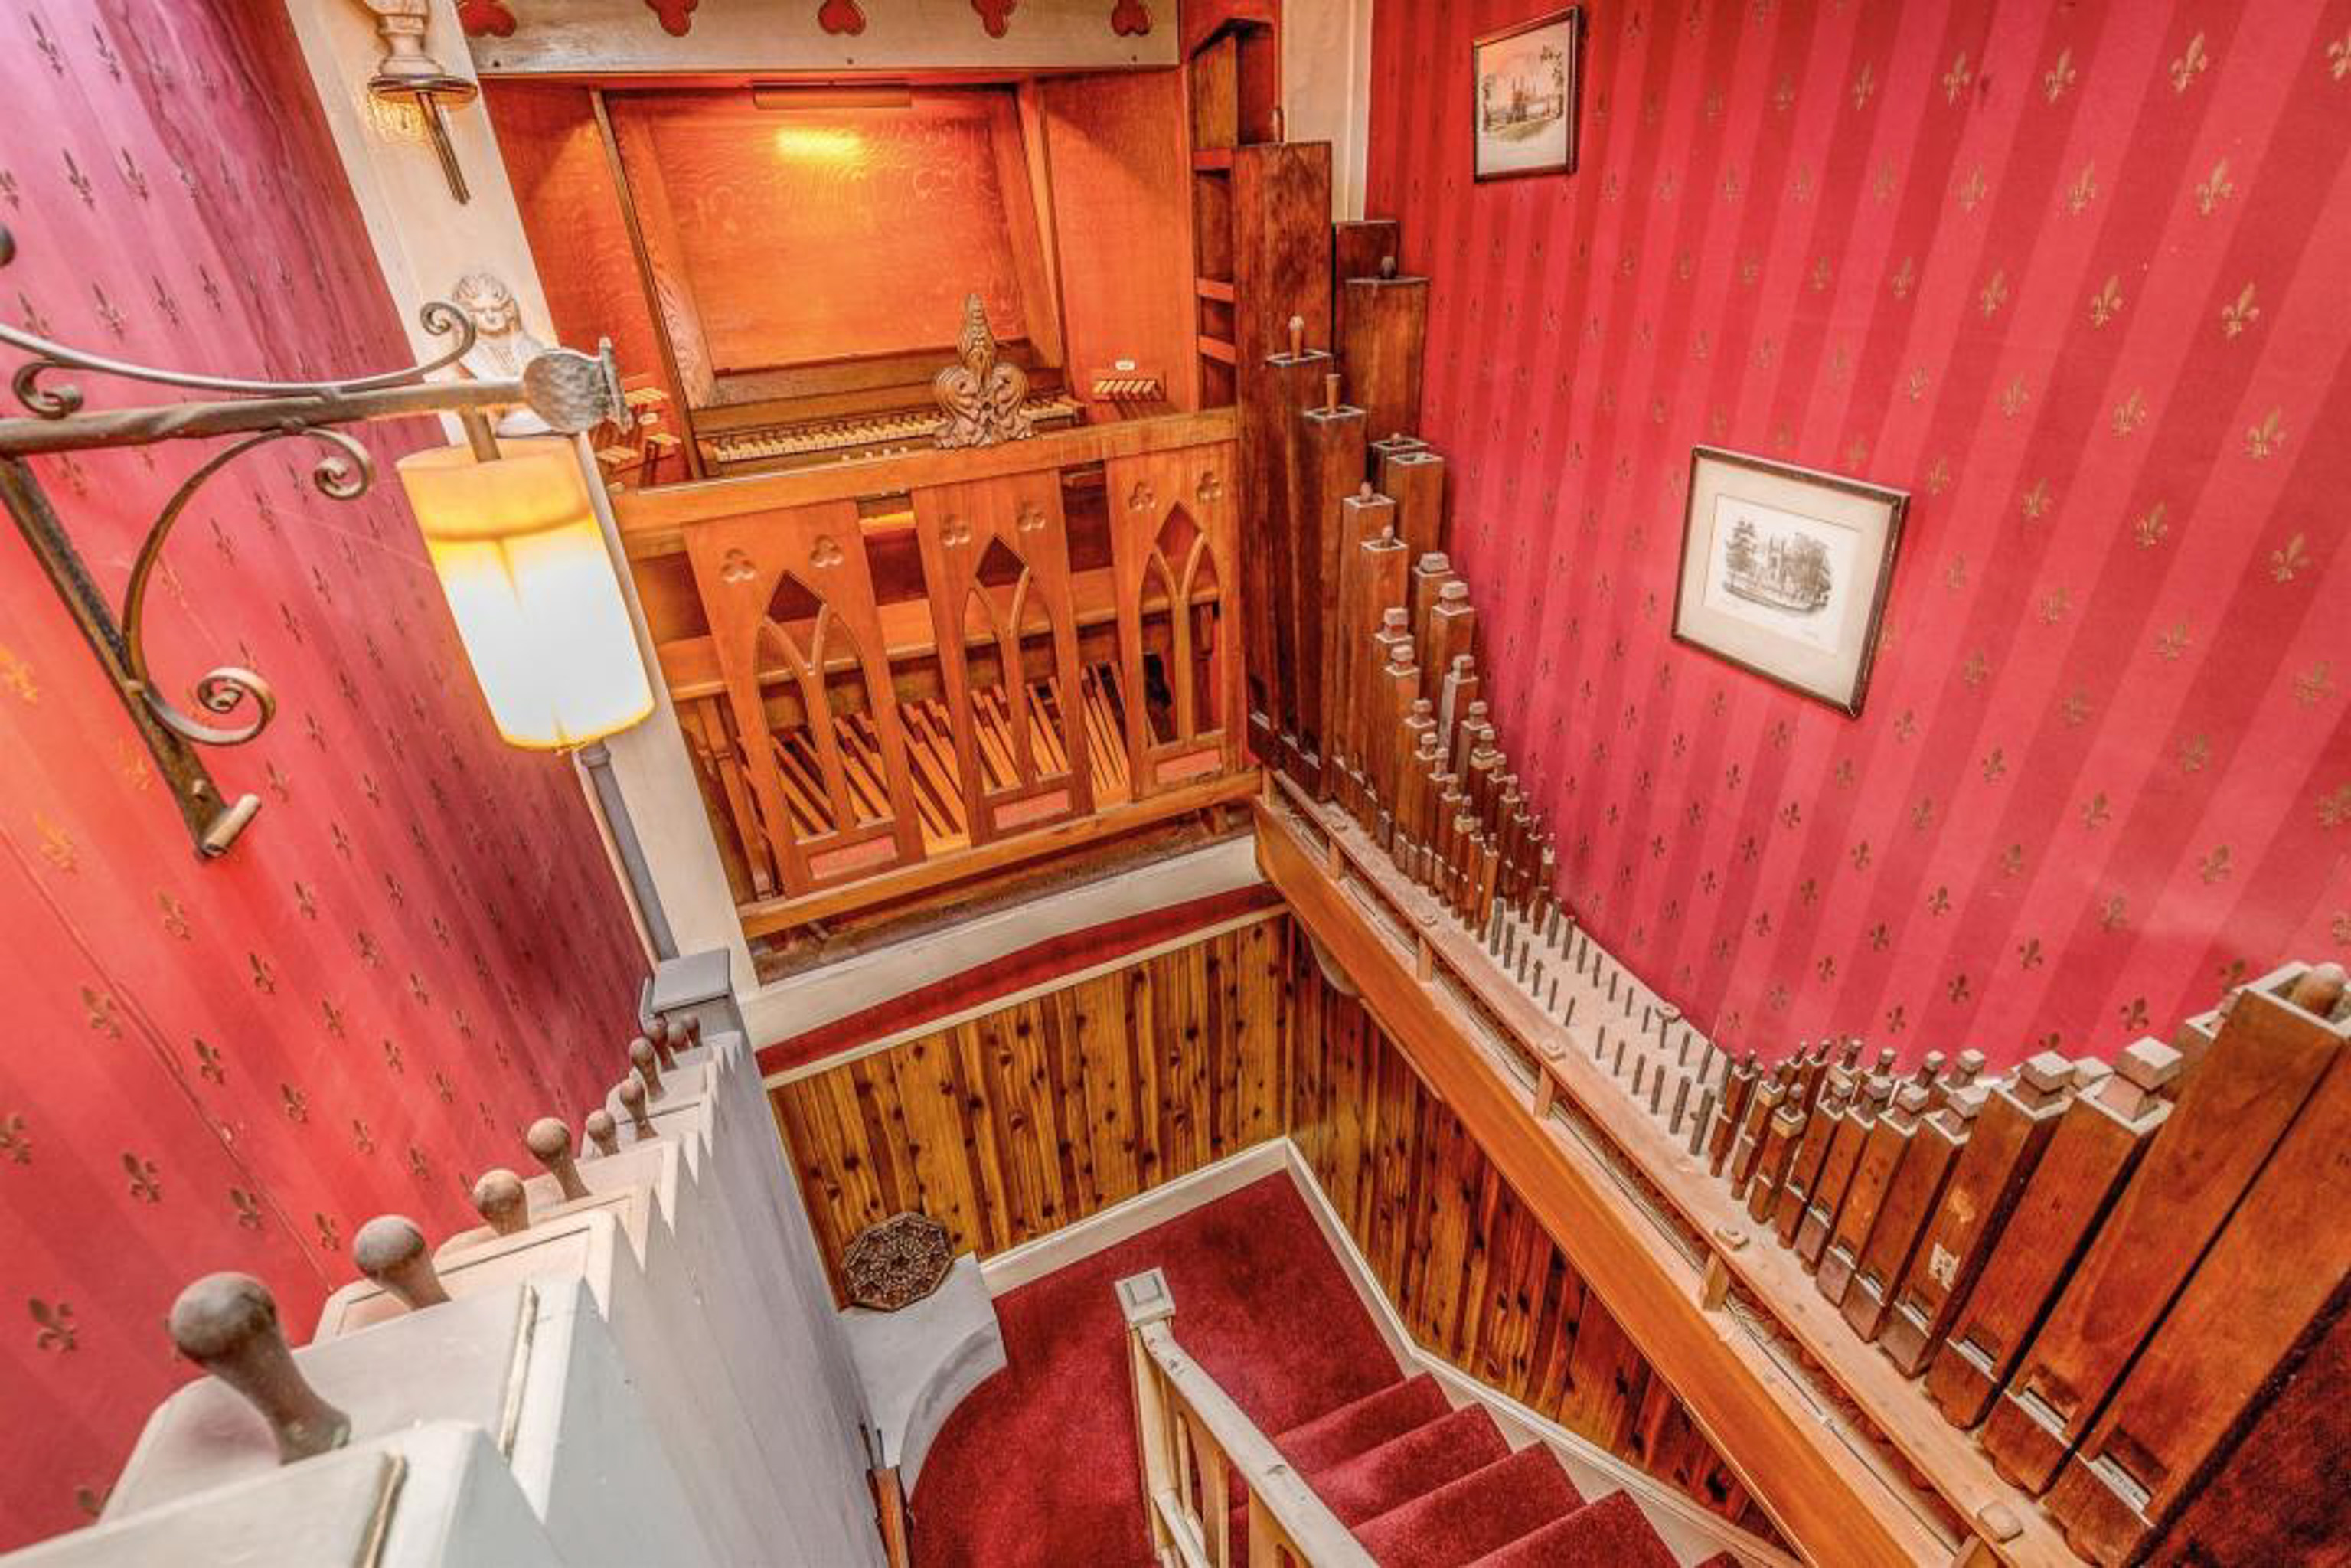 Built-In Pipe Organ
A snap from the inside of 42 Cliftonwood Crescent, which had a built-in pipe organ! 

Image courtesy the RightMove listing via Bristol 24/7

EDIT T...